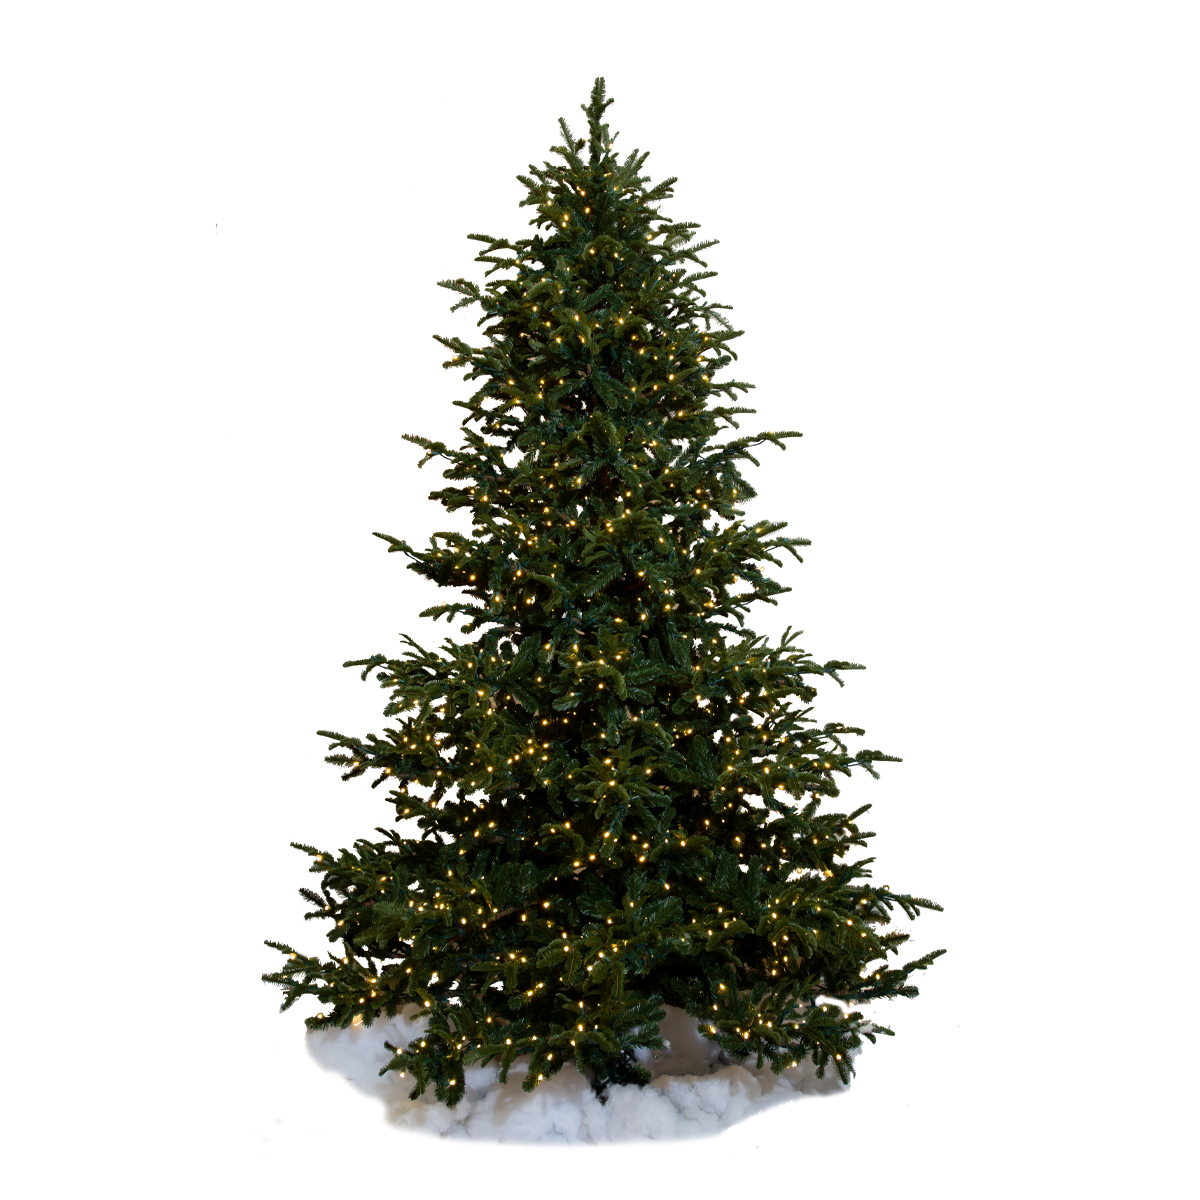 Star Fir Deluxe Christmas Tree - Warm White Glow LED Lights - One-Plug Pole - 10ft Tall